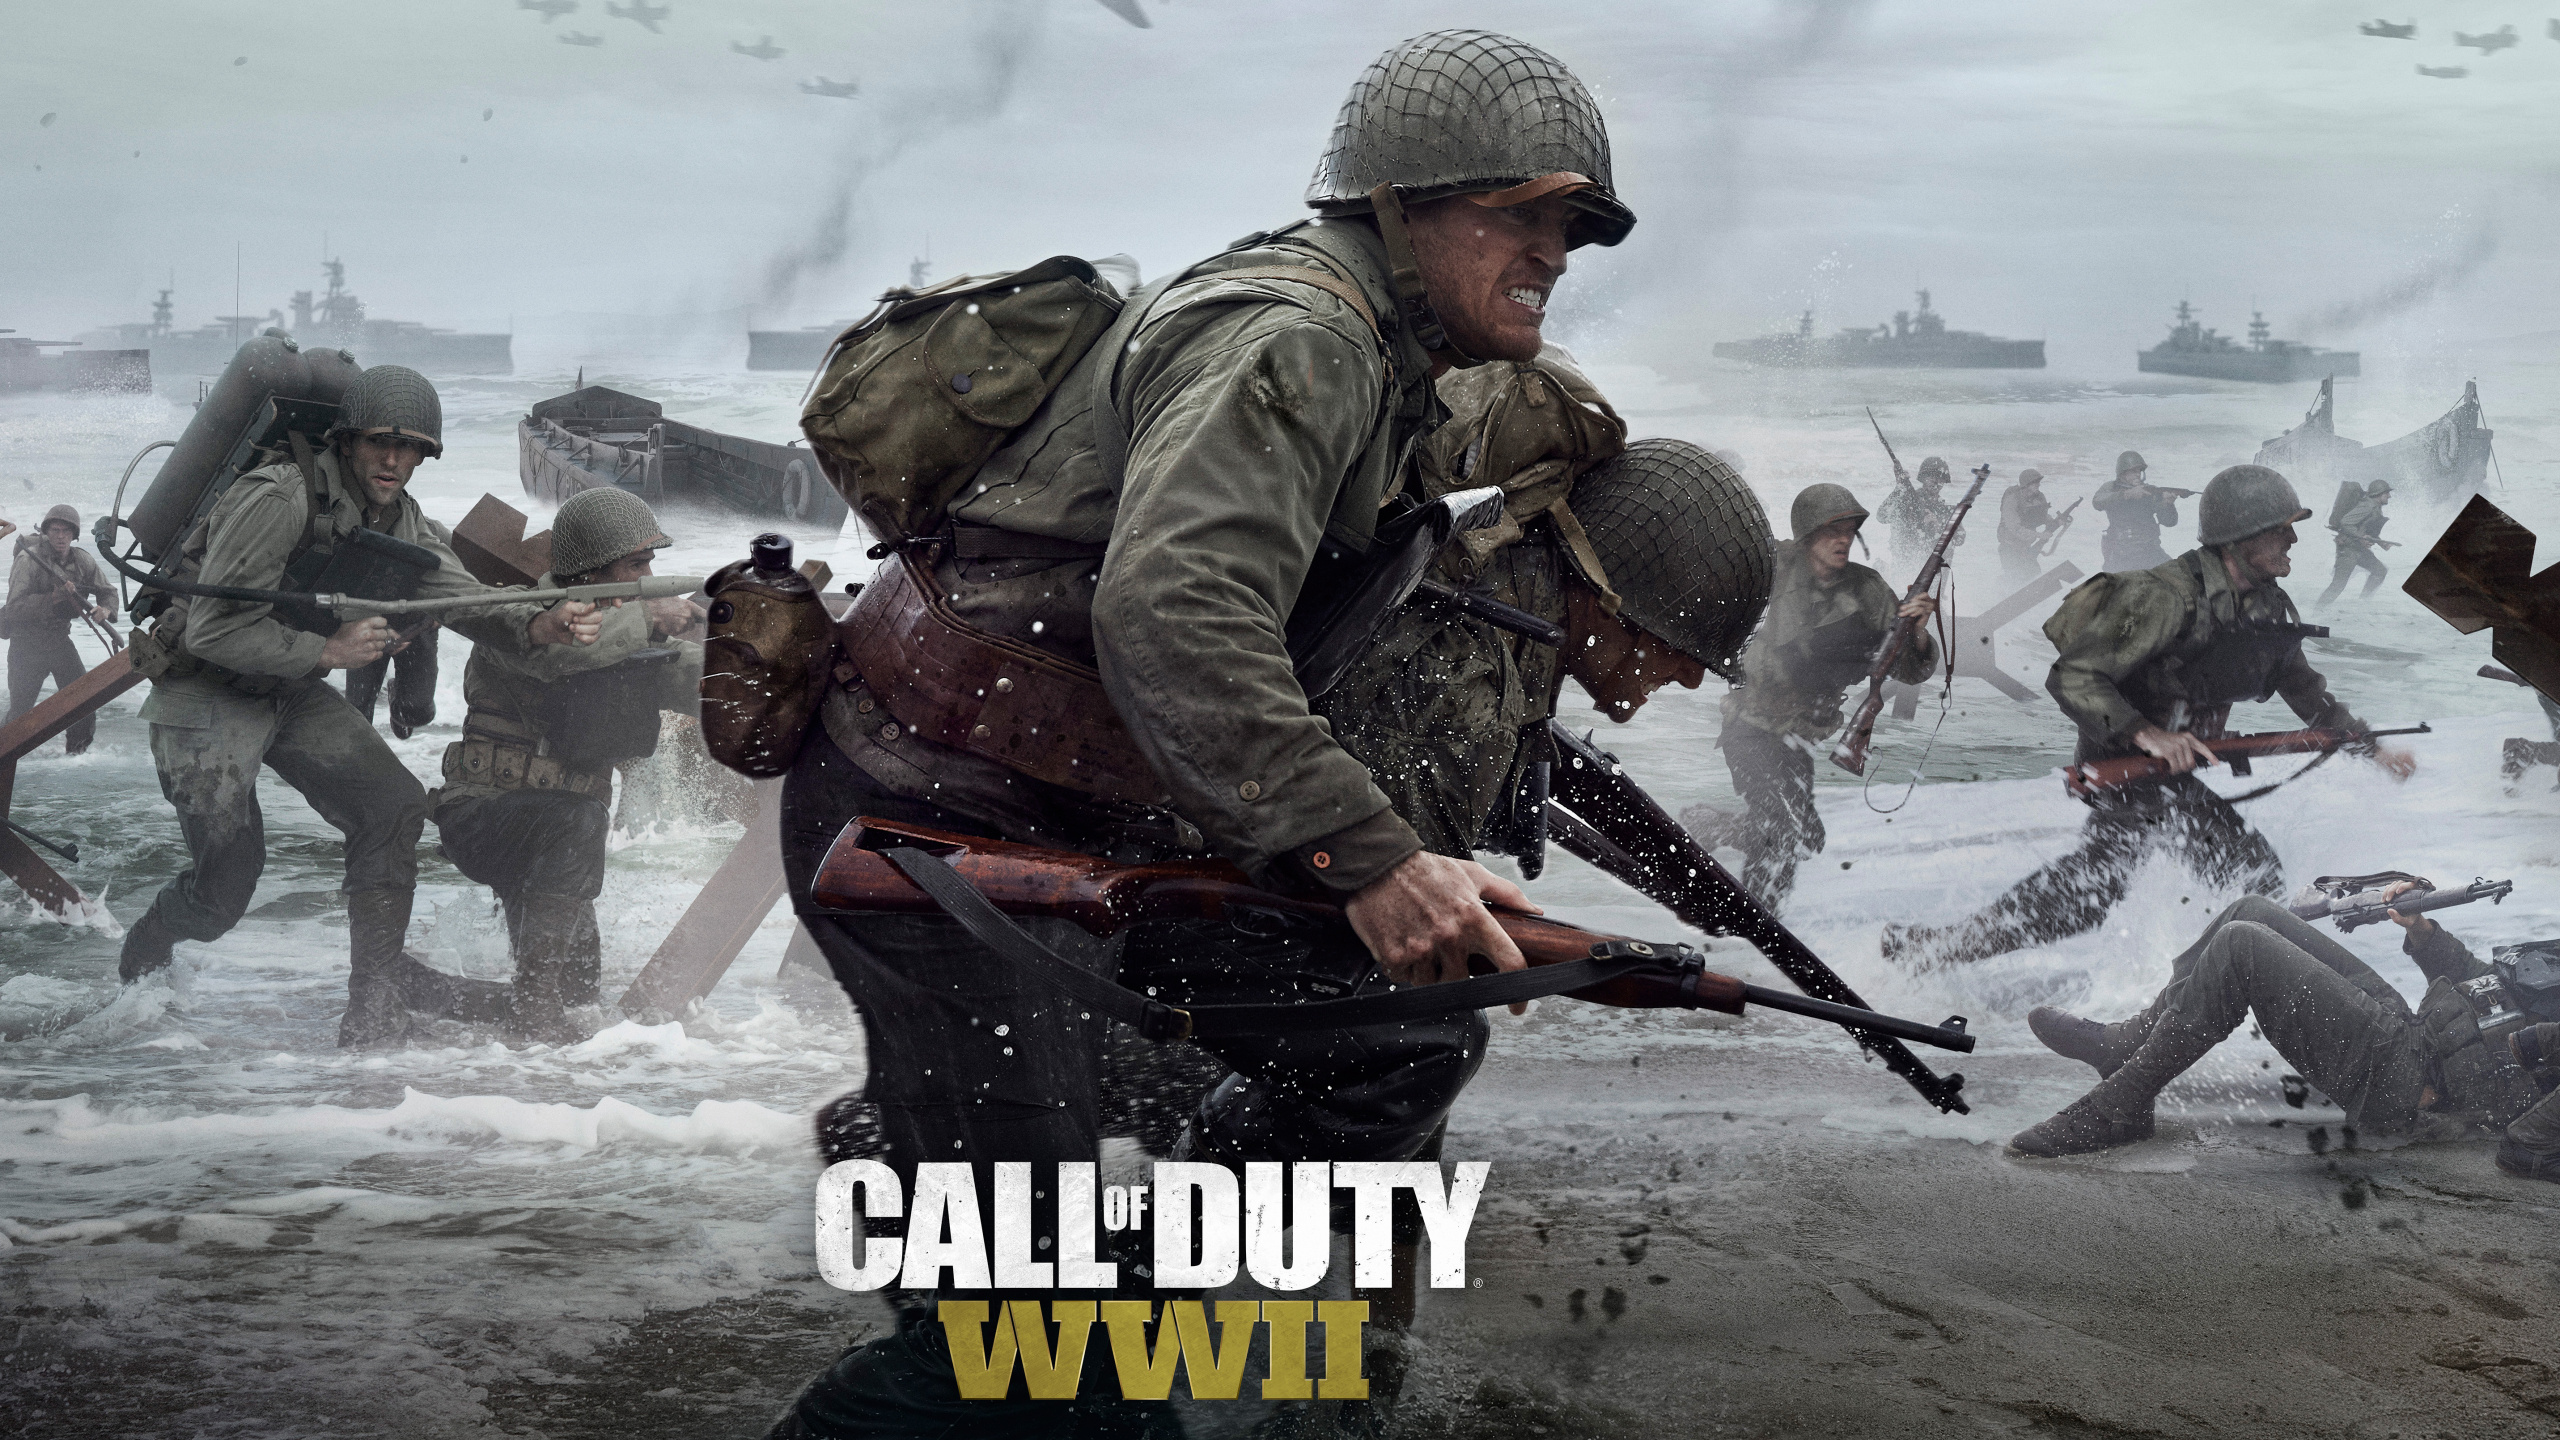 Call of Duty Ww2, Call of Duty WWII, Call of Duty, Call of Duty World at War, Activision. Wallpaper in 2560x1440 Resolution